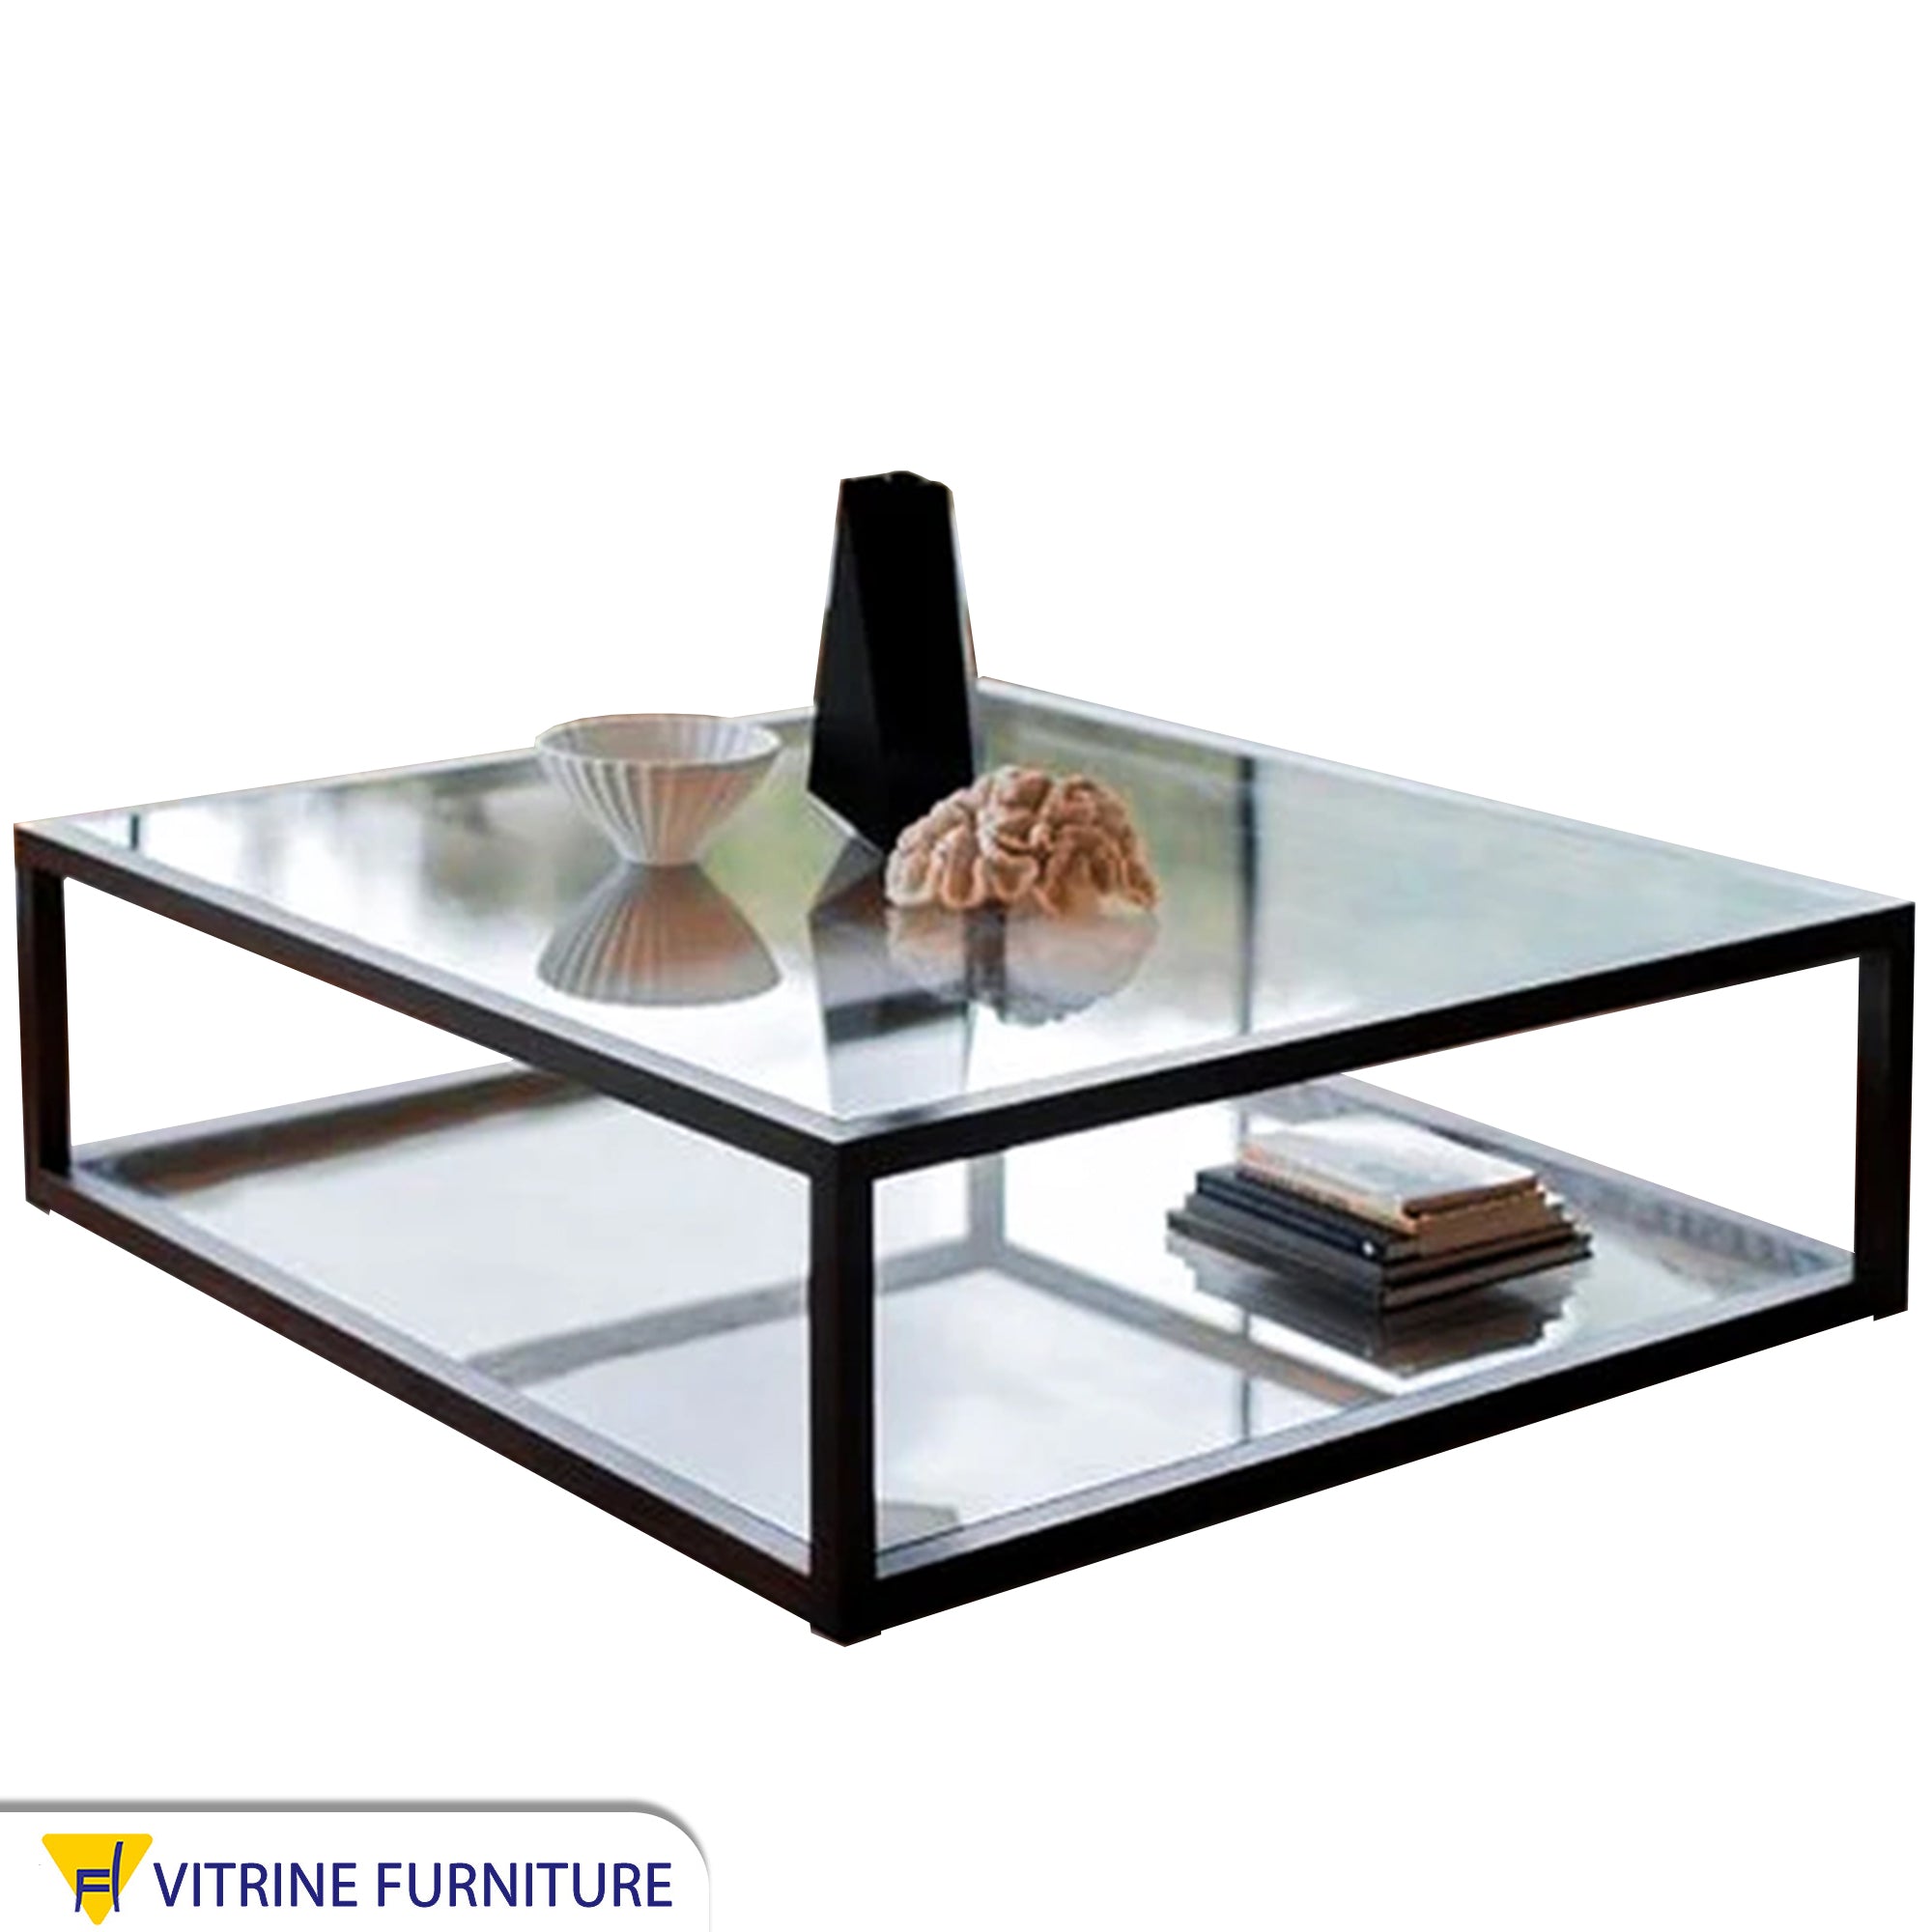 Black table with upper and lower surface